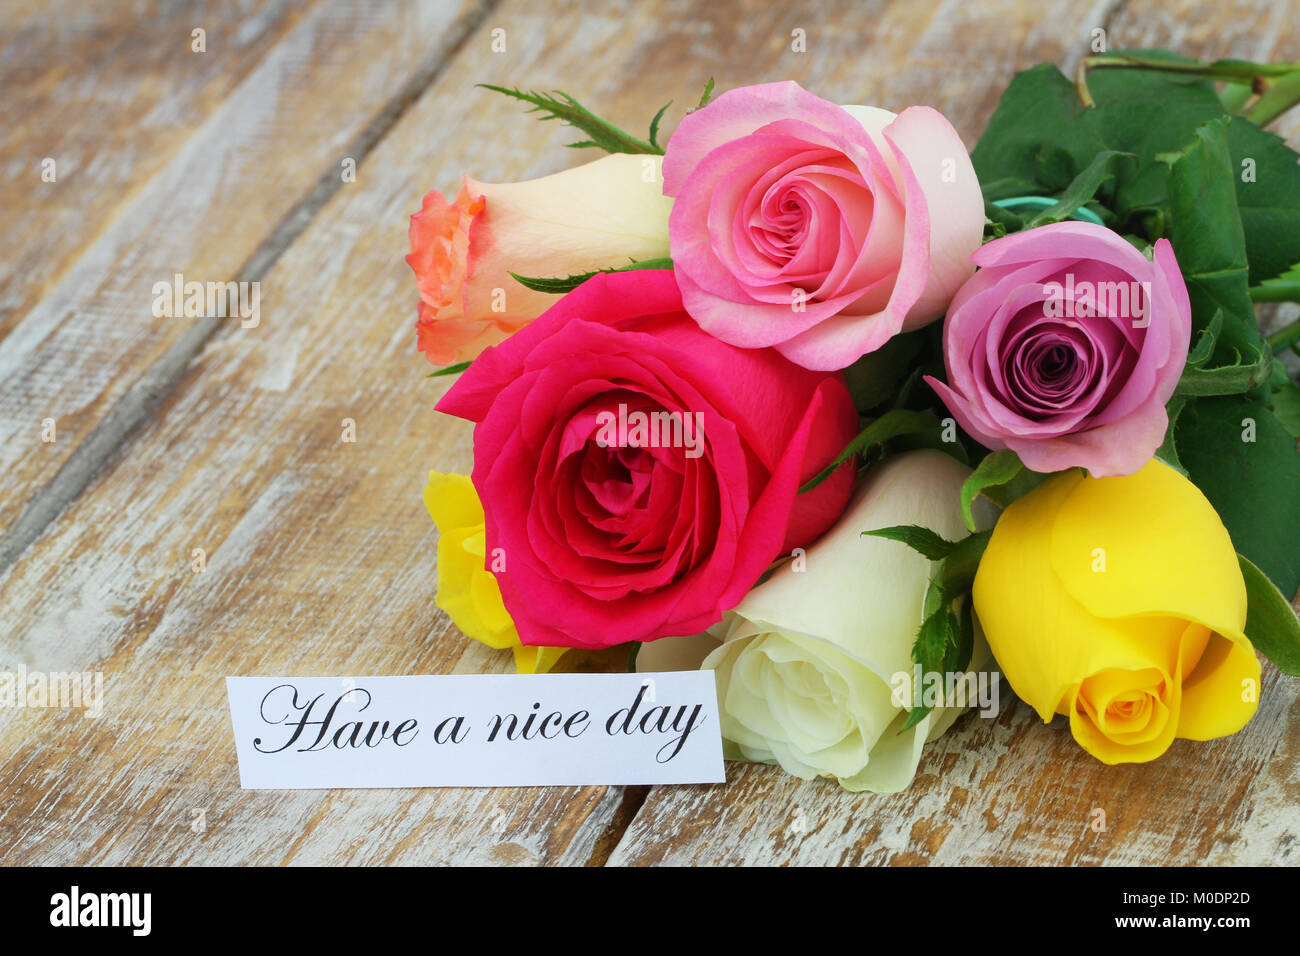 Have a nice day card with colorful rose bouquet on rustic wooden ...